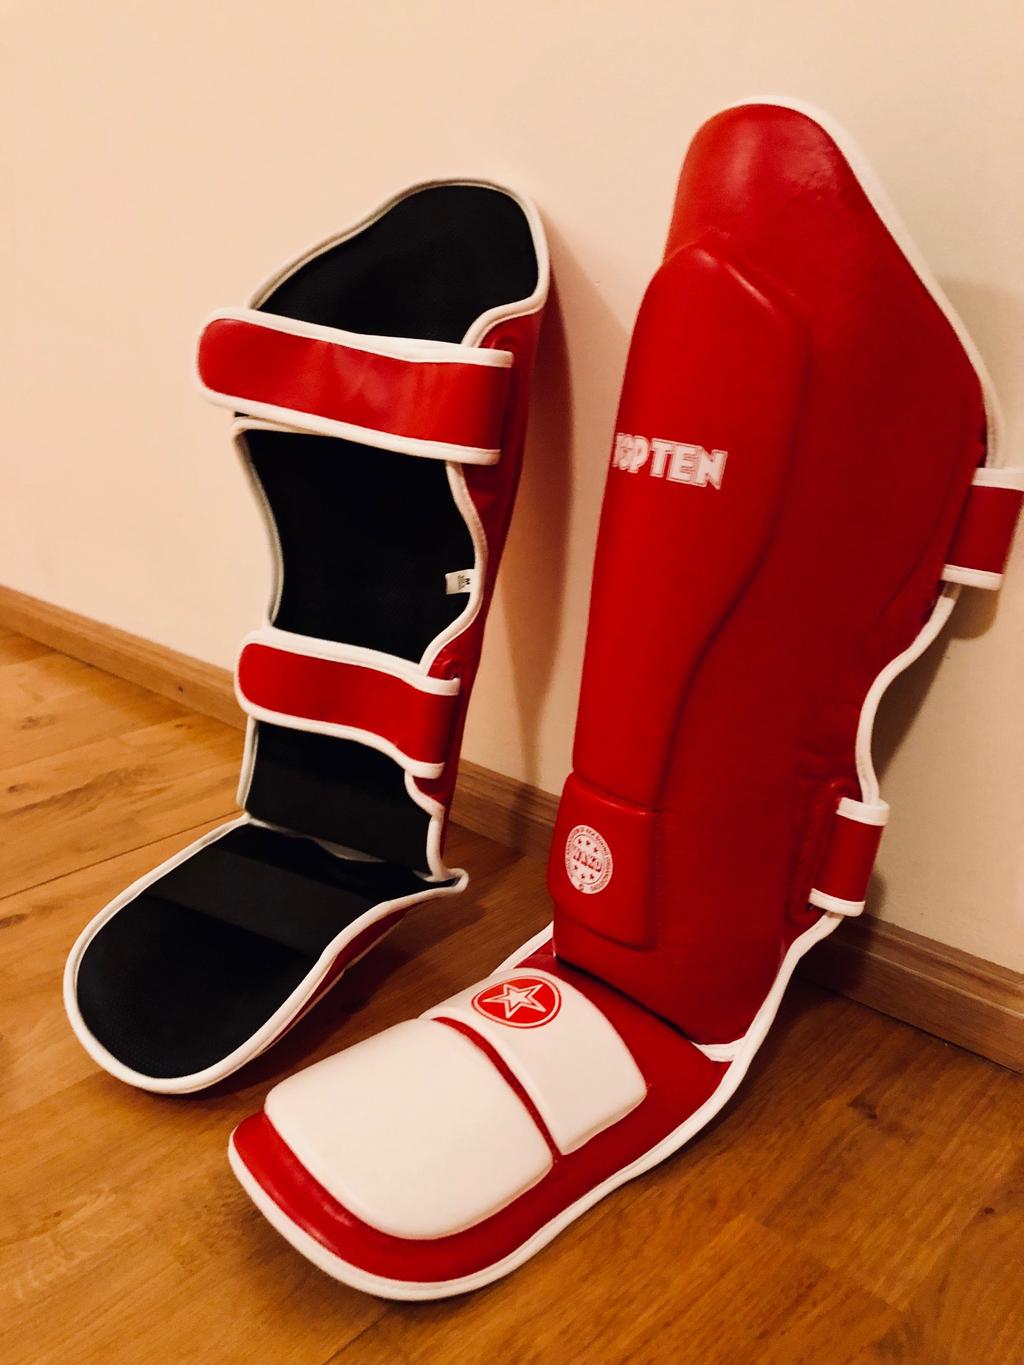 Shin guards (Type of accepted shin guards can be found on the picture below (Brand doesn t matter).